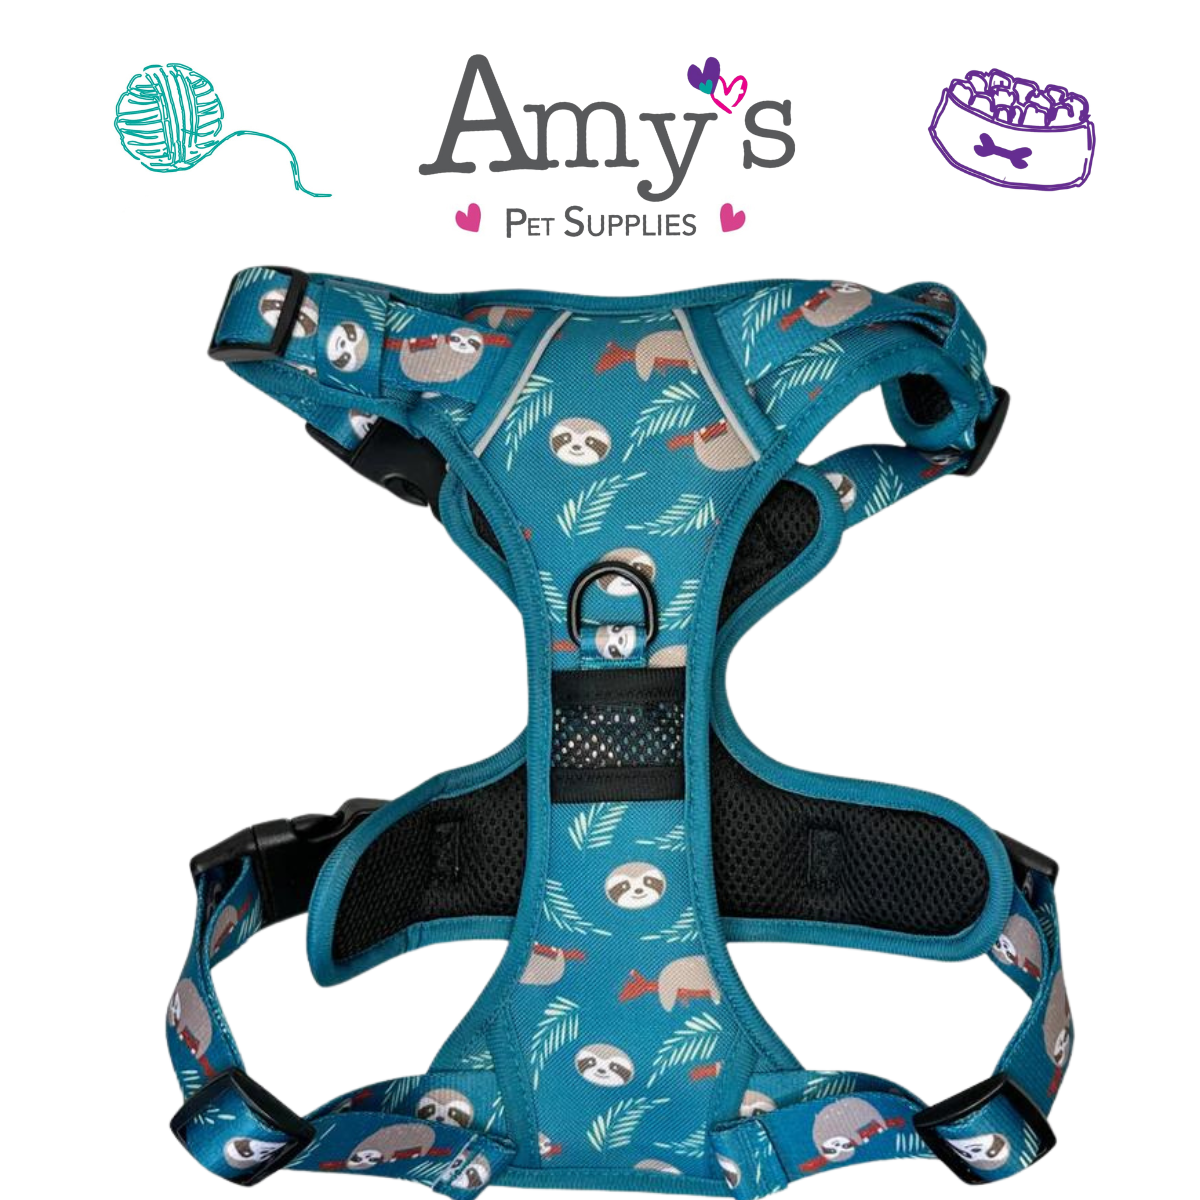 Pup Chic - Lazy Sloth Range- Harnesses, Leads, Etc